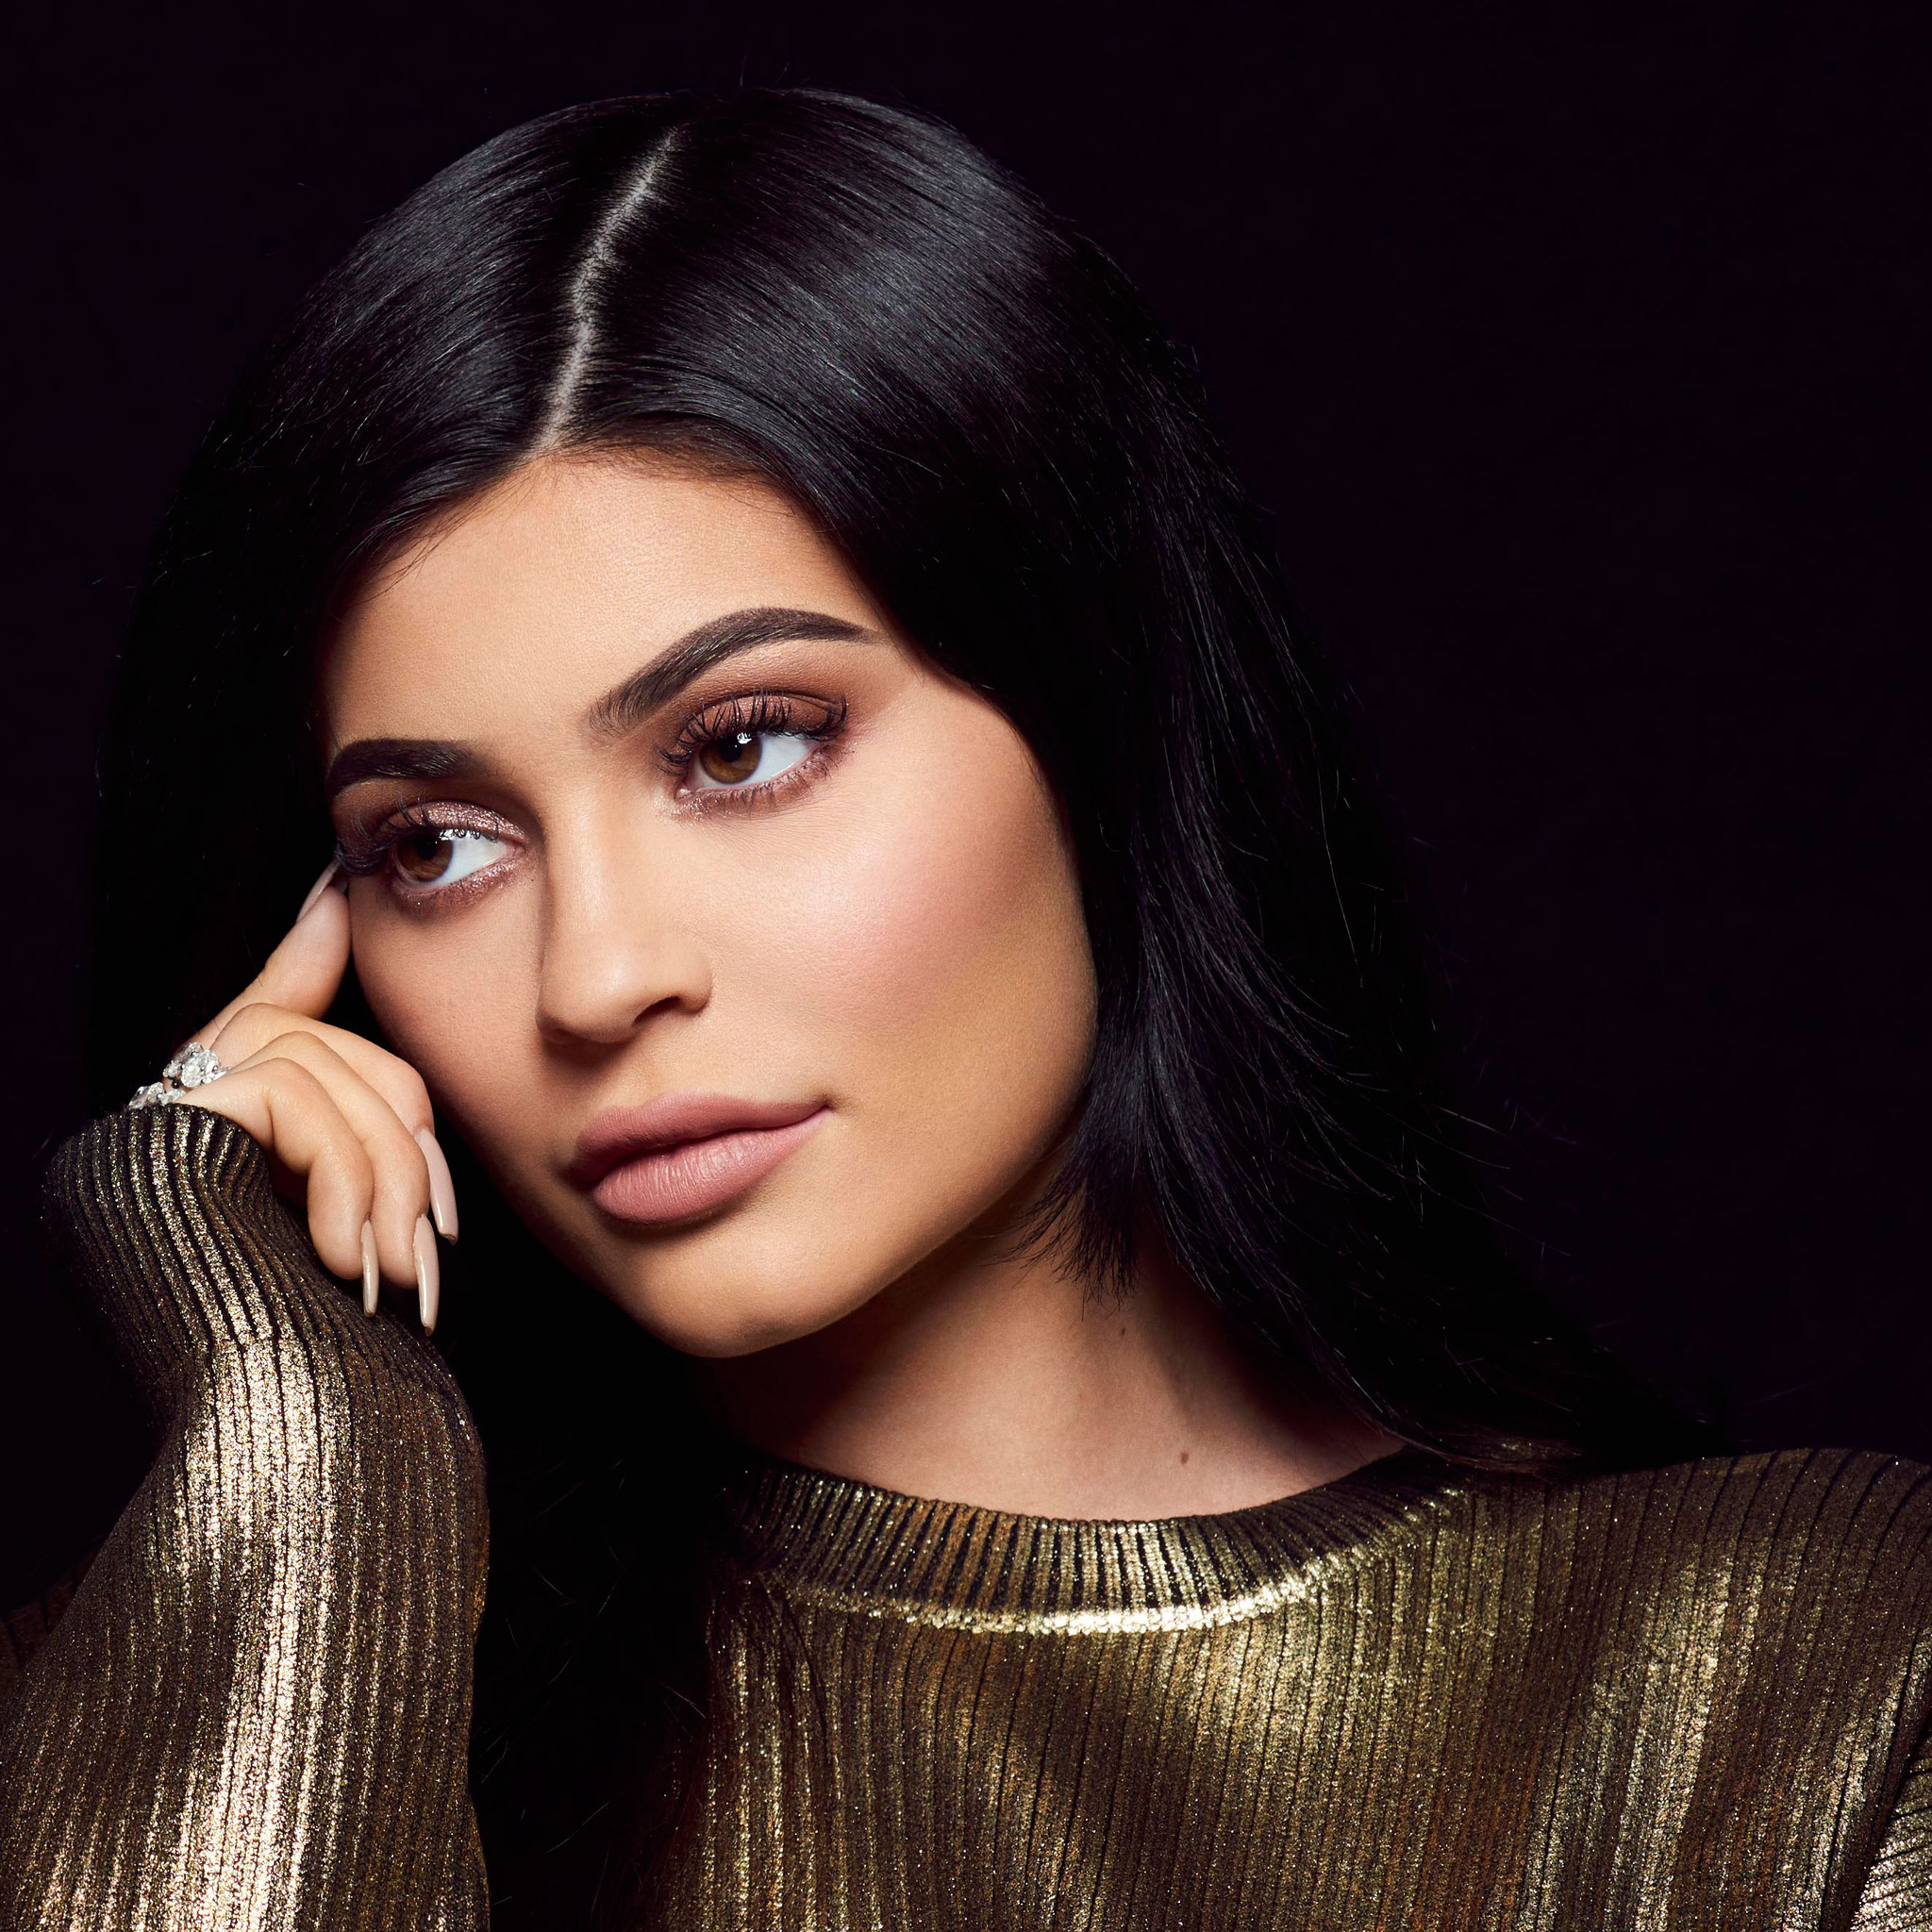 2048x2048 Kylie Jenner 4k 2018 Ipad Air ,HD 4k Wallpapers,Images ...